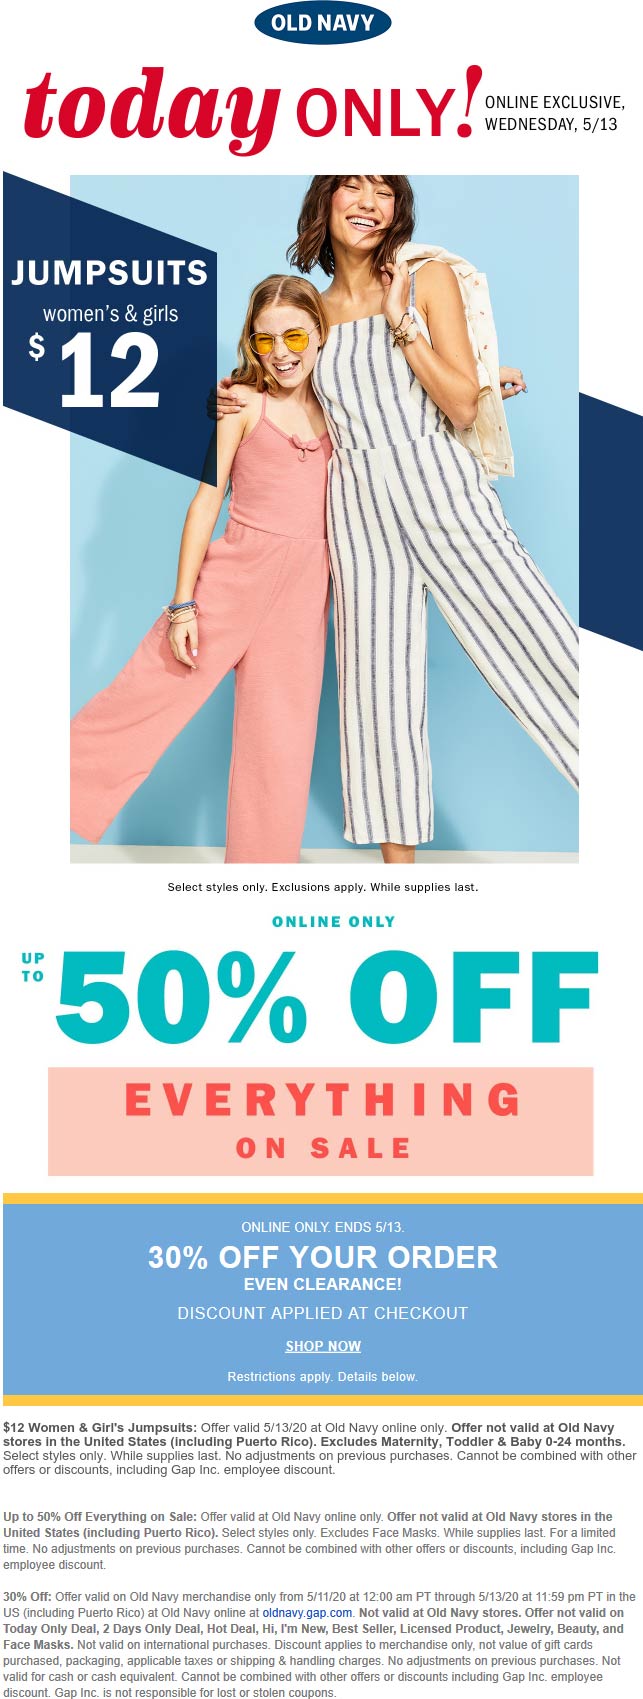 30 off everything today at Old Navy oldnavy The Coupons App®